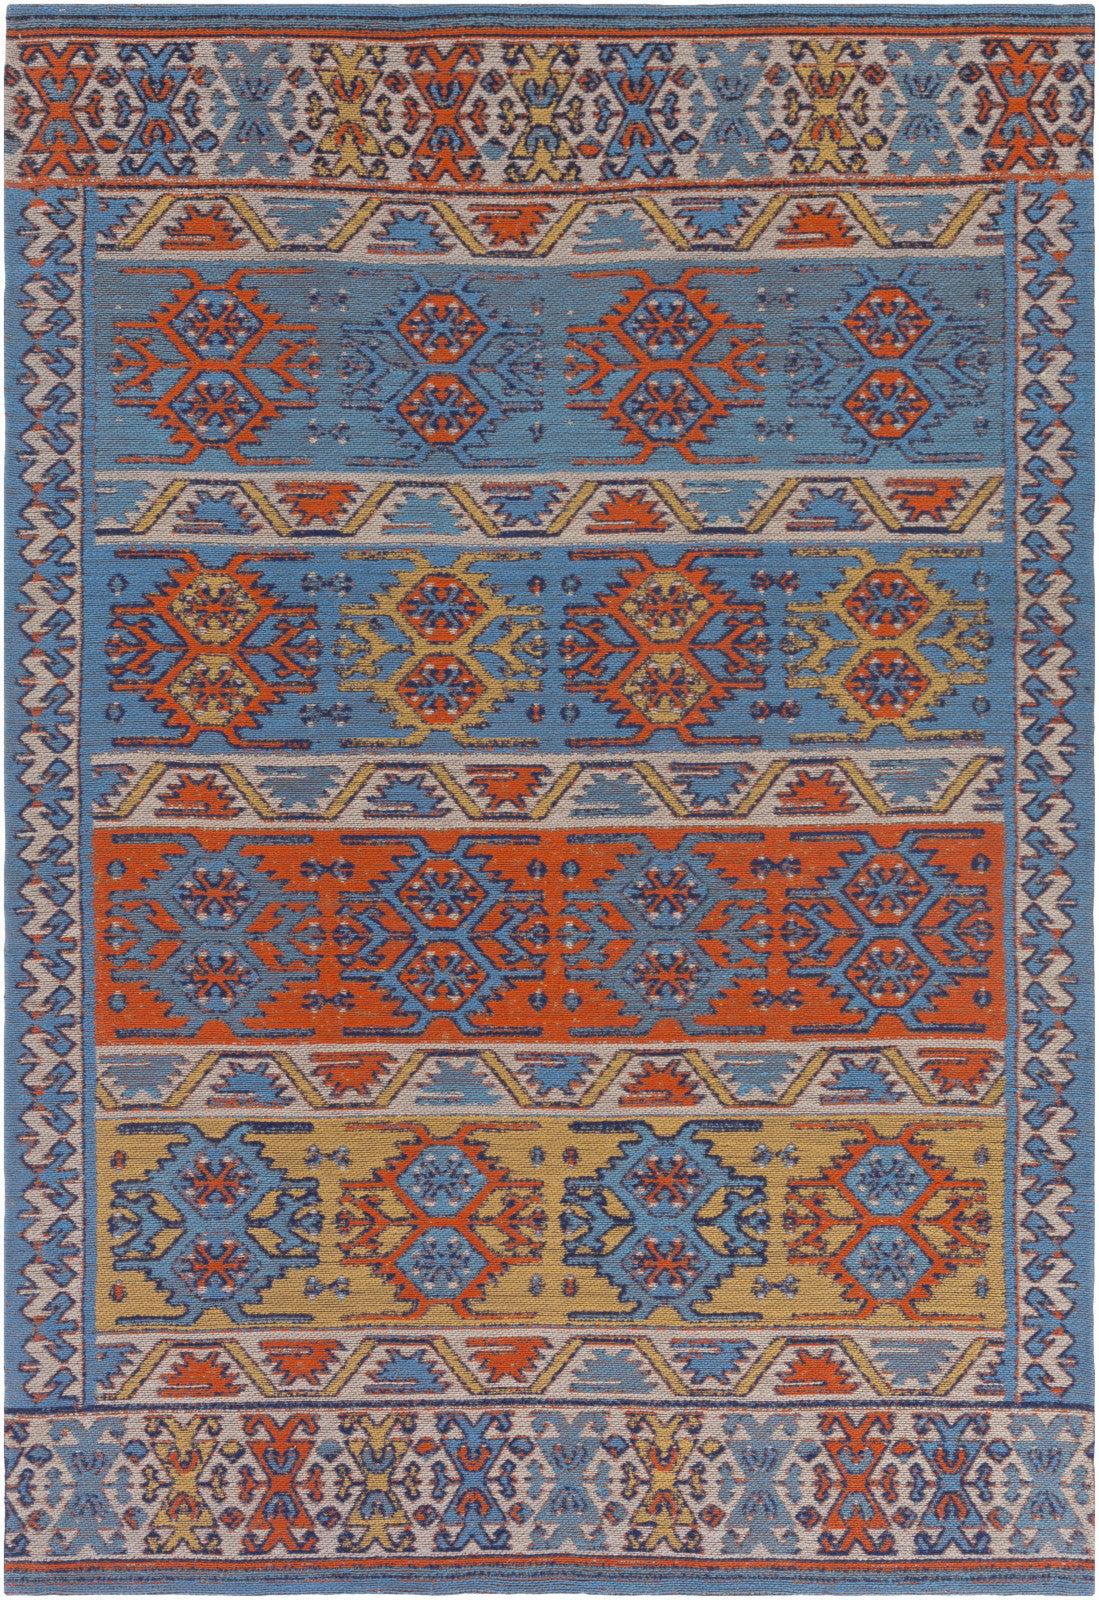 Artistic Weavers Sajal Feather Poppy Red Denim Blue Peach Turquoise Navy Area Rug main image